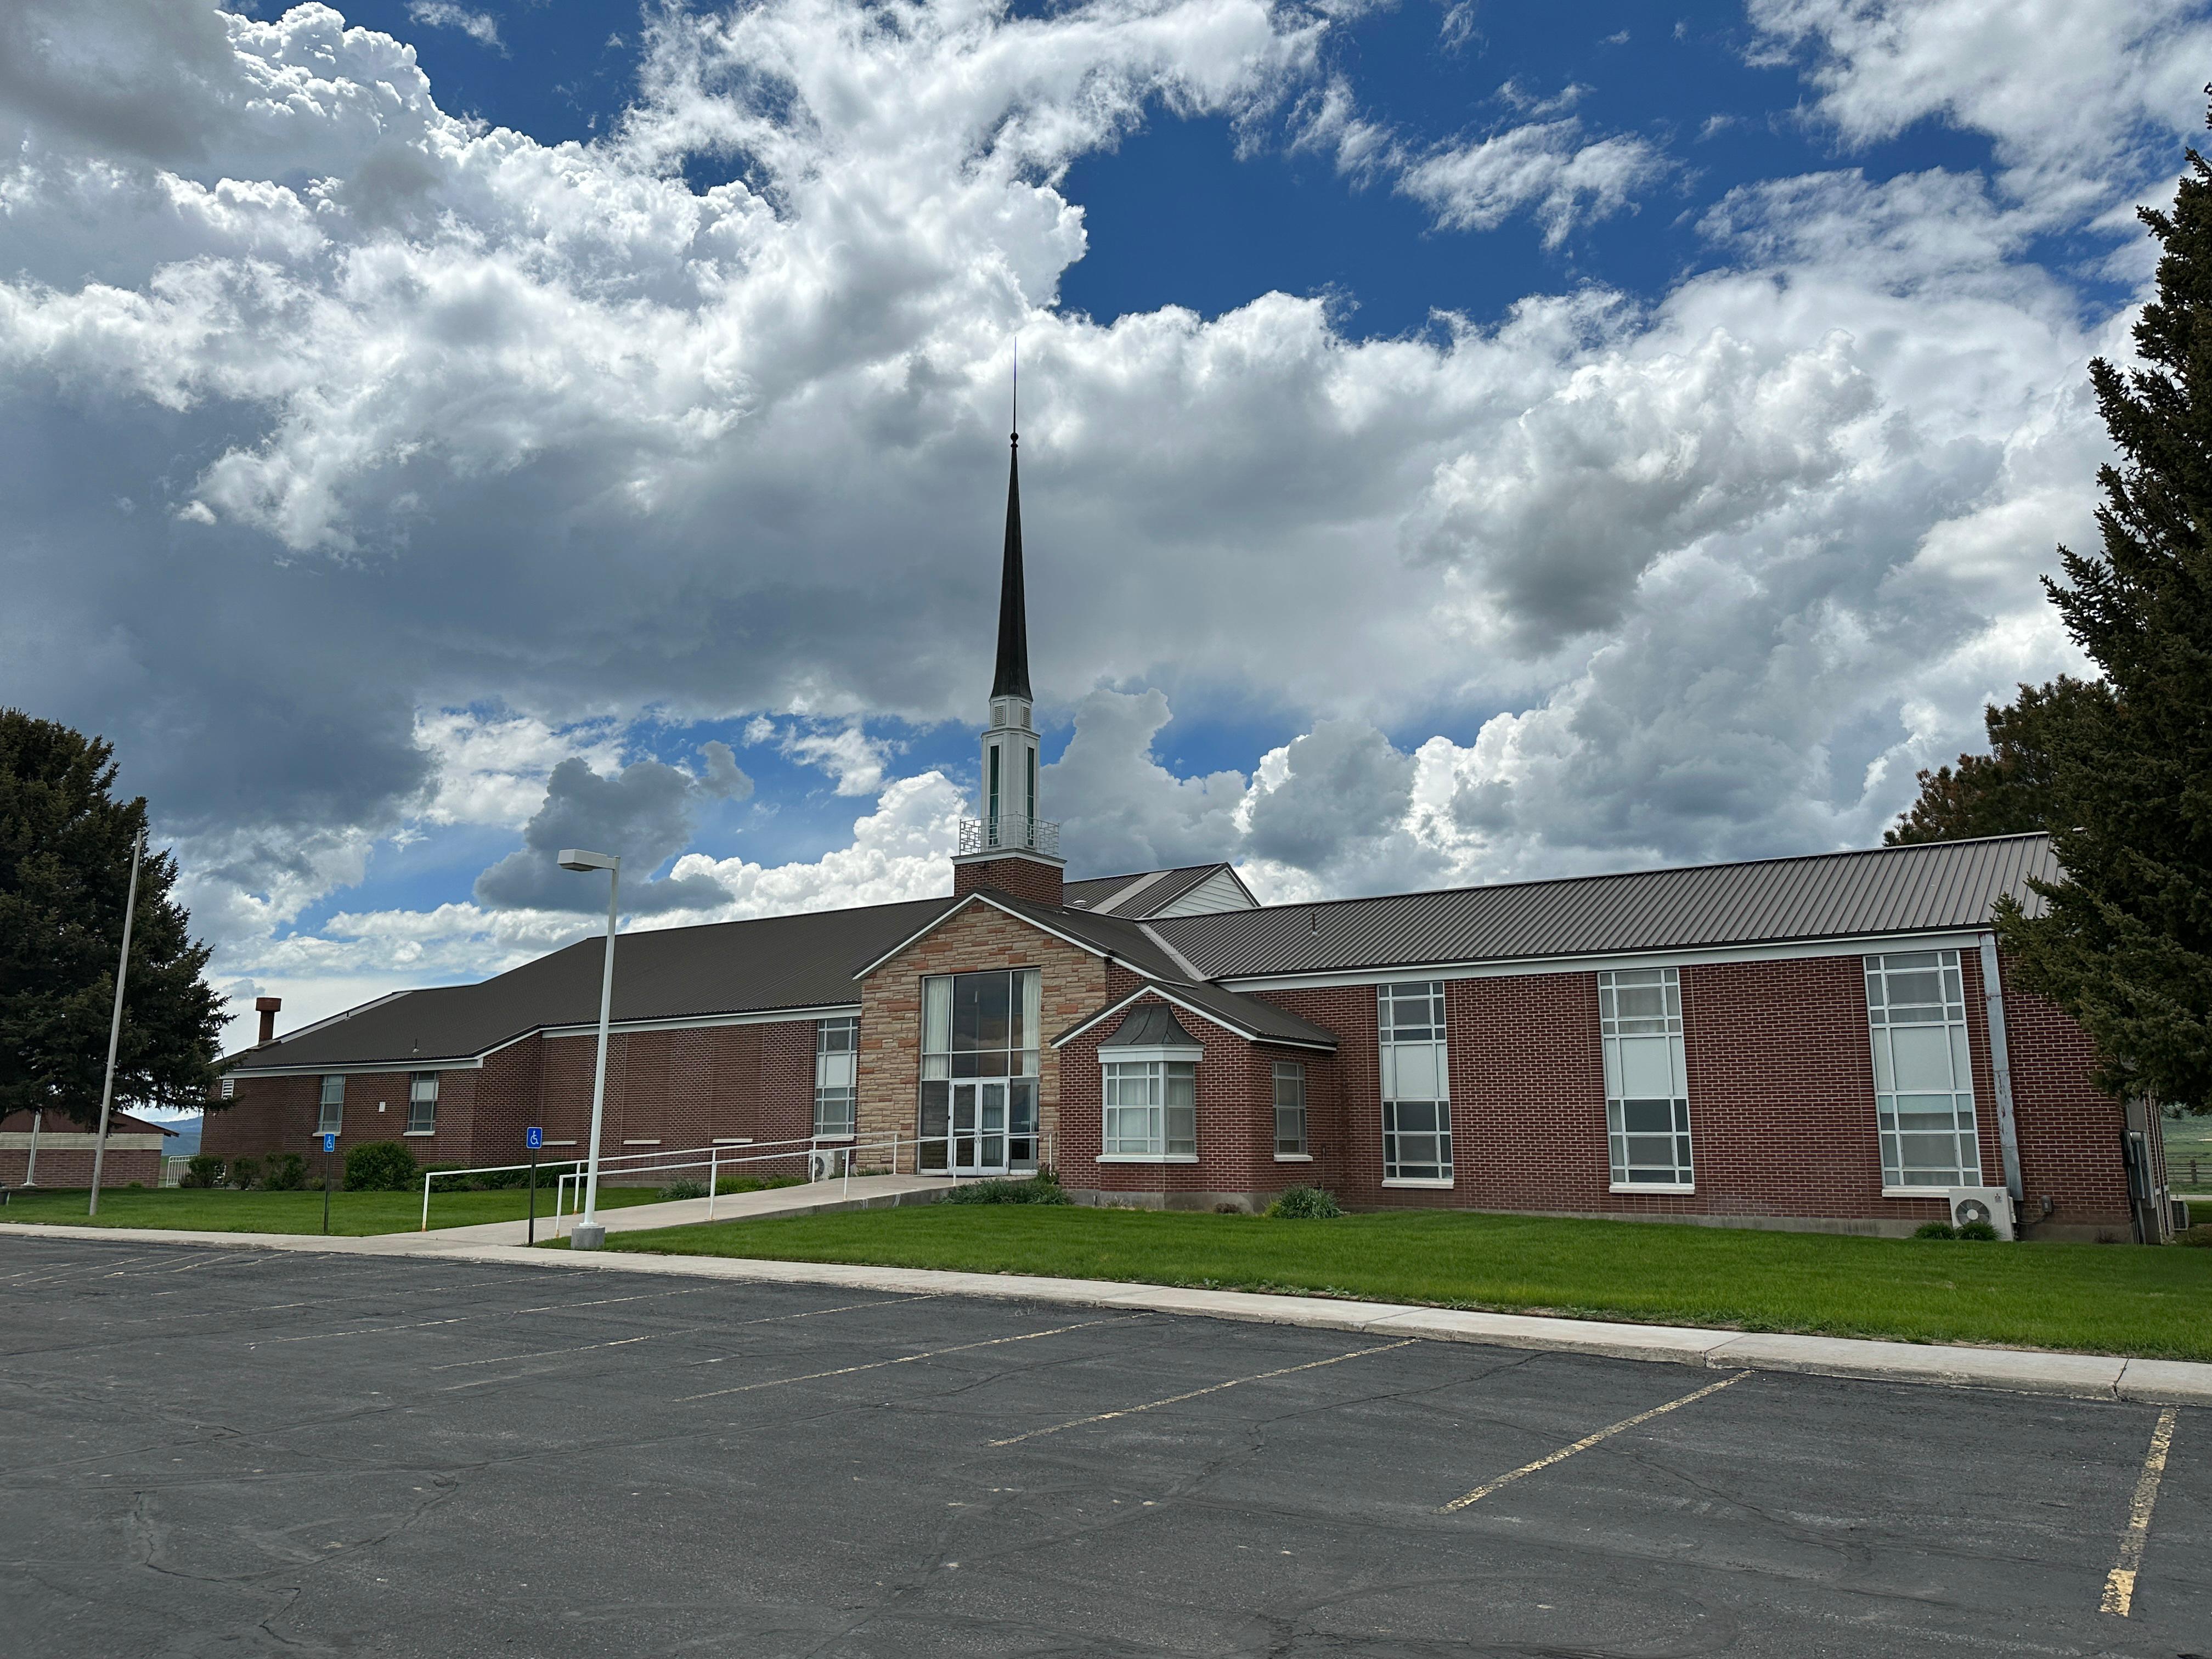 The Chesterfield Church Building in the Grace Idaho Stake of the Church of Jesus Christ of Latter-day Saints.